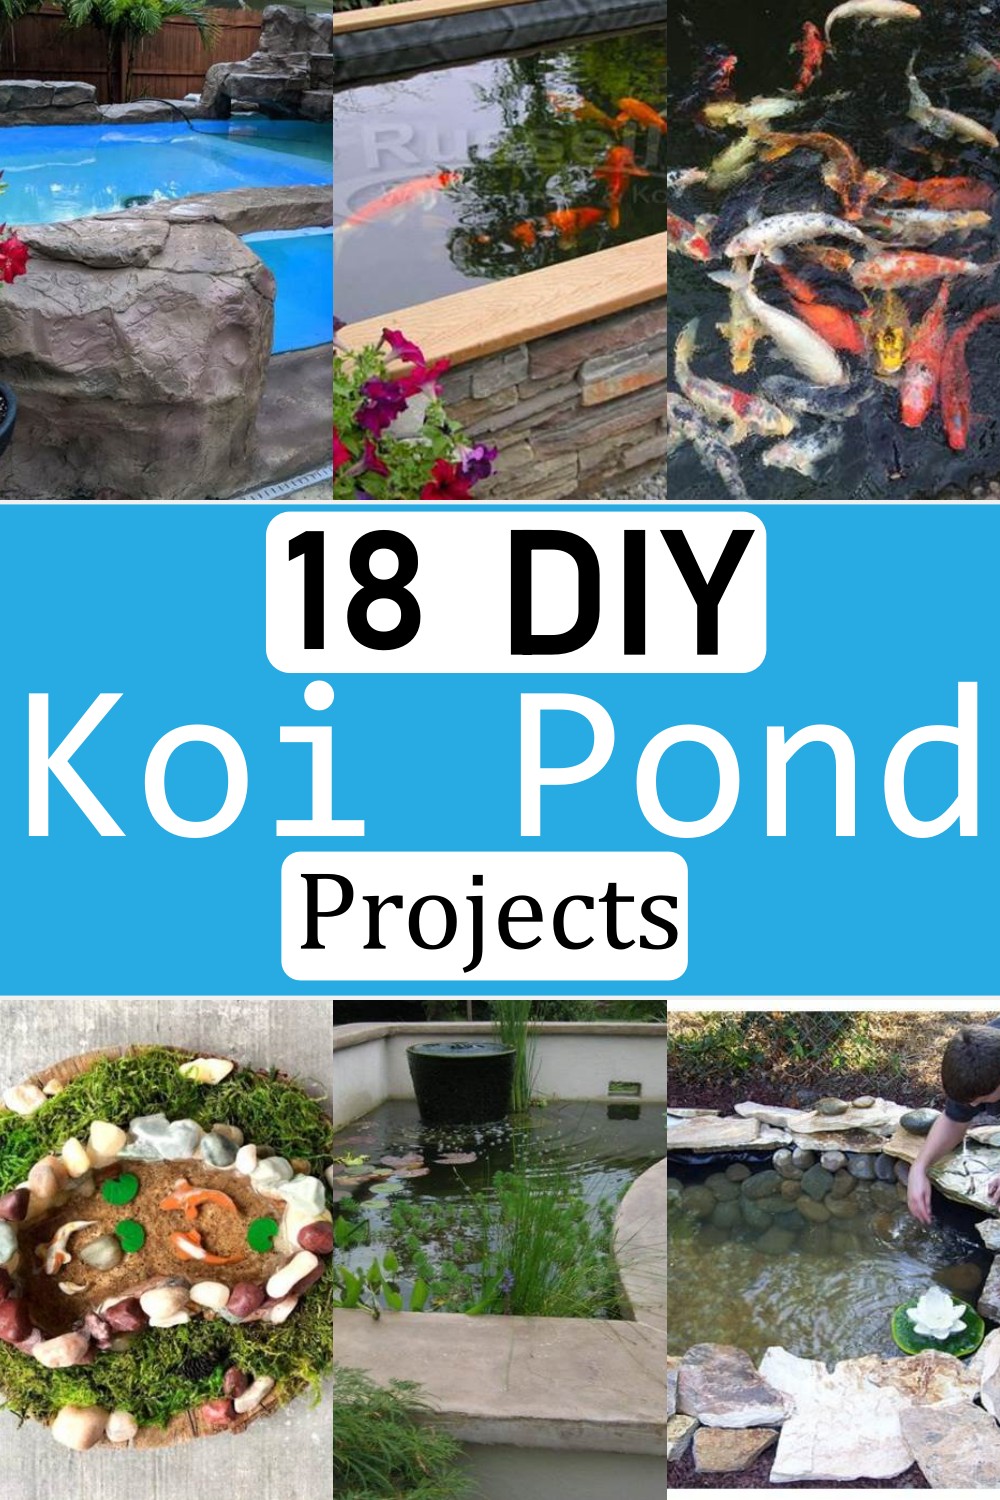  Koi Pond Projects 